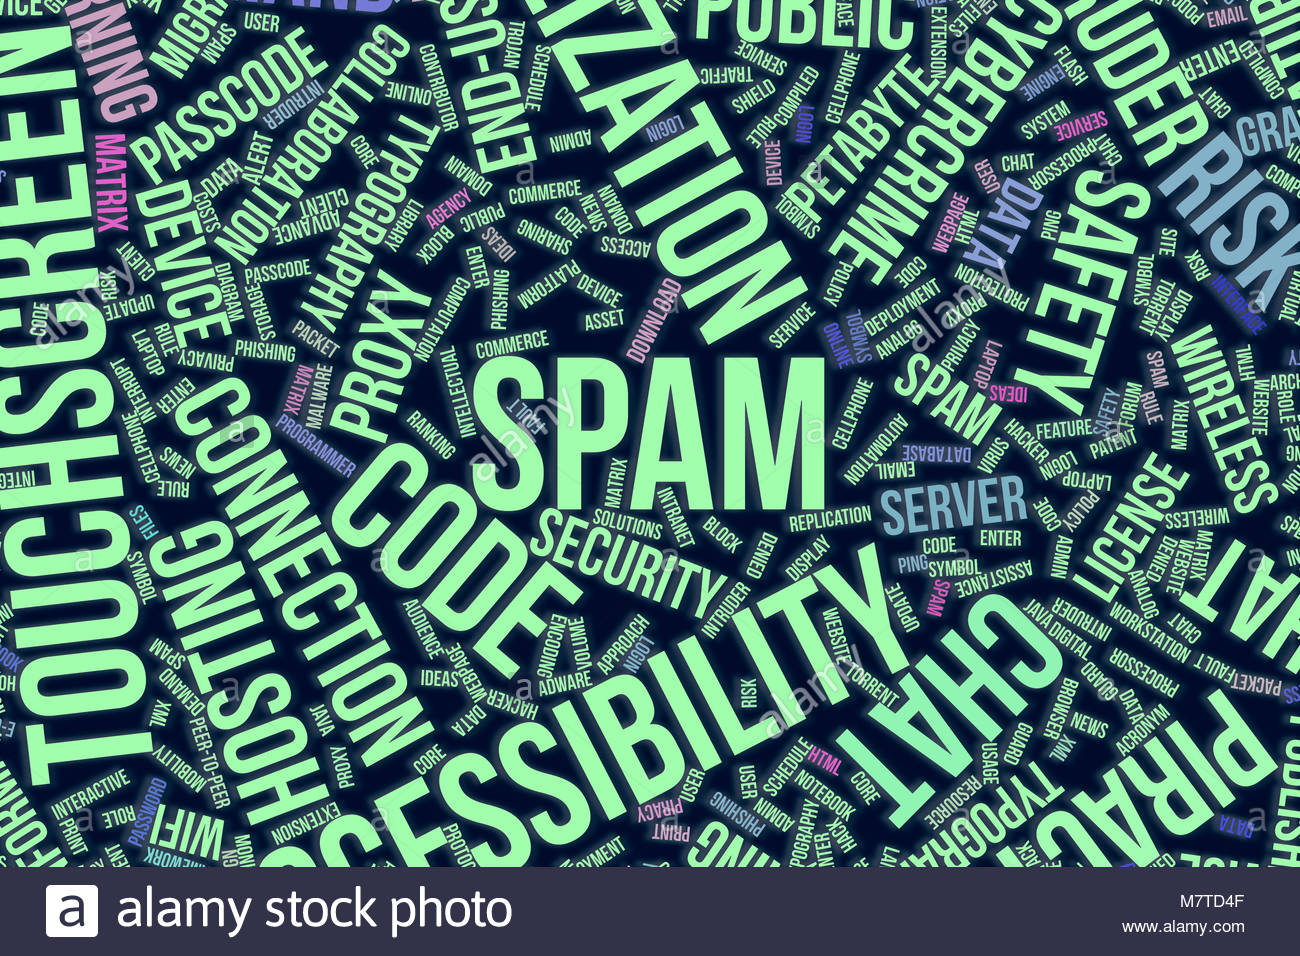 Spam It Information Technology Conceptual Word Cloud For